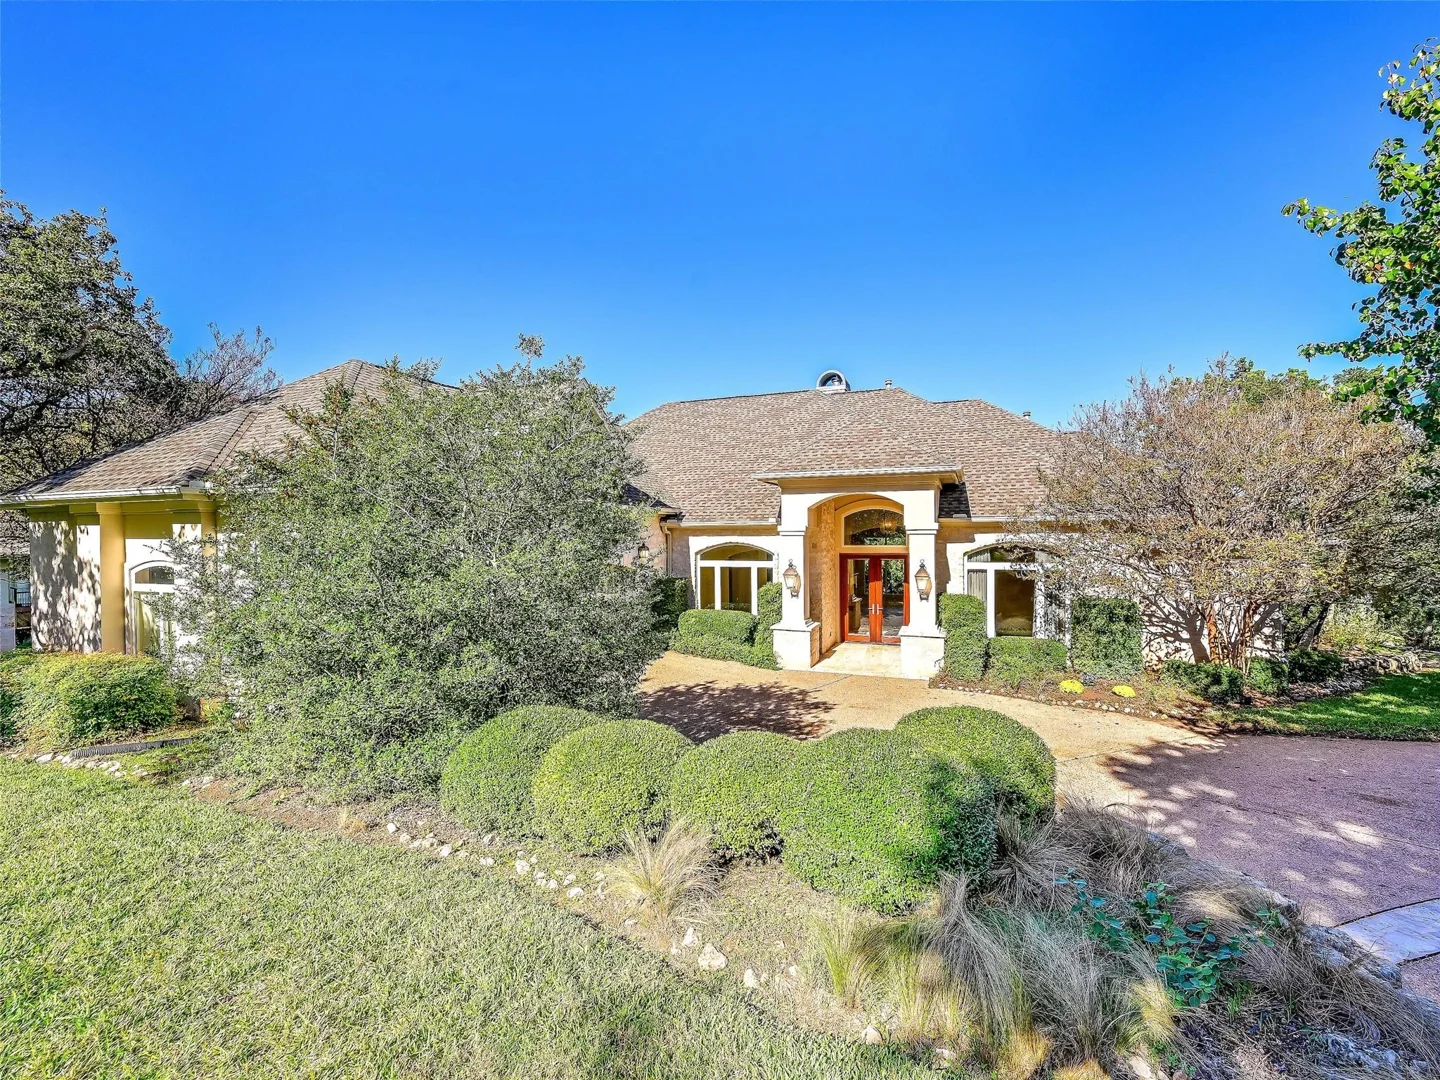 Stunning Home in the Foothills of Barton Creek